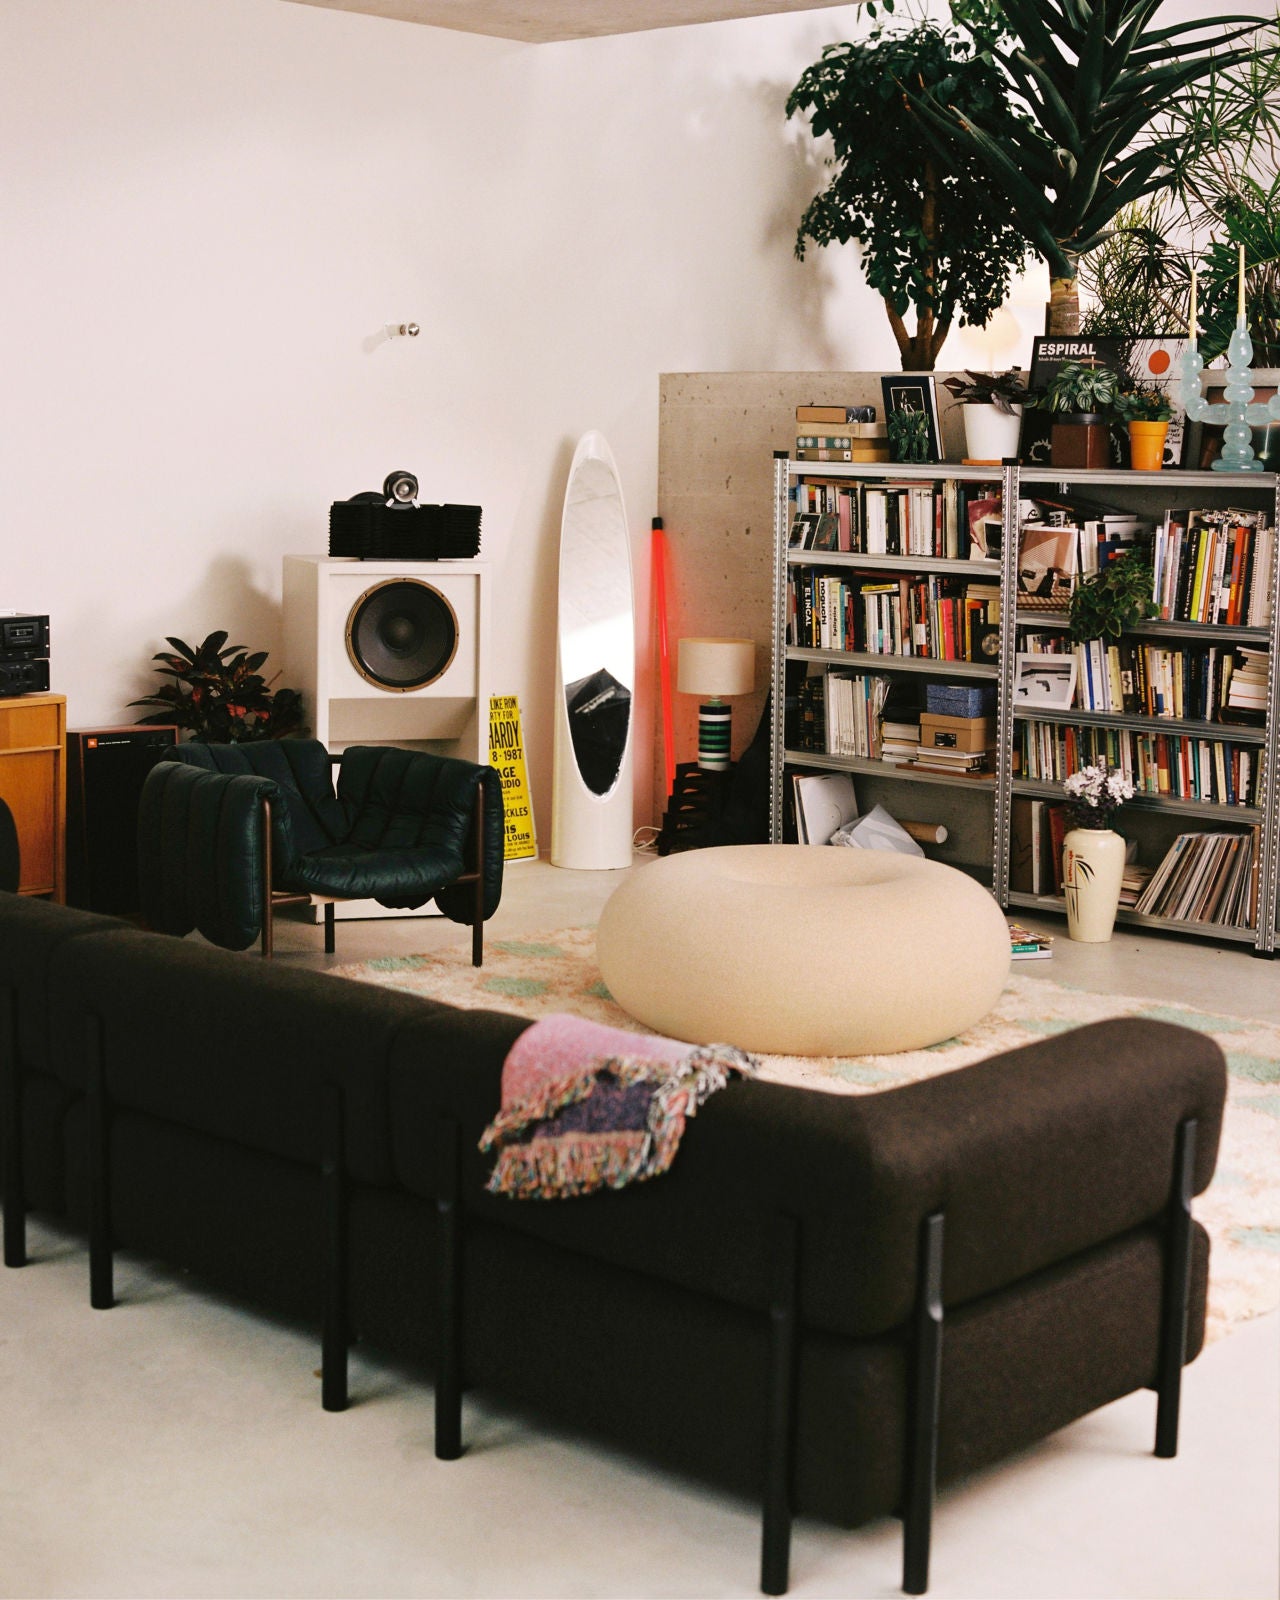 Modern living room with large windows, a beige sectional sofa, a navy armchair, a pink ottoman, and various plants. Natural light streams in, highlighting a mix of contemporary furniture and decor, including a shelving unit displaying neatly arranged items.